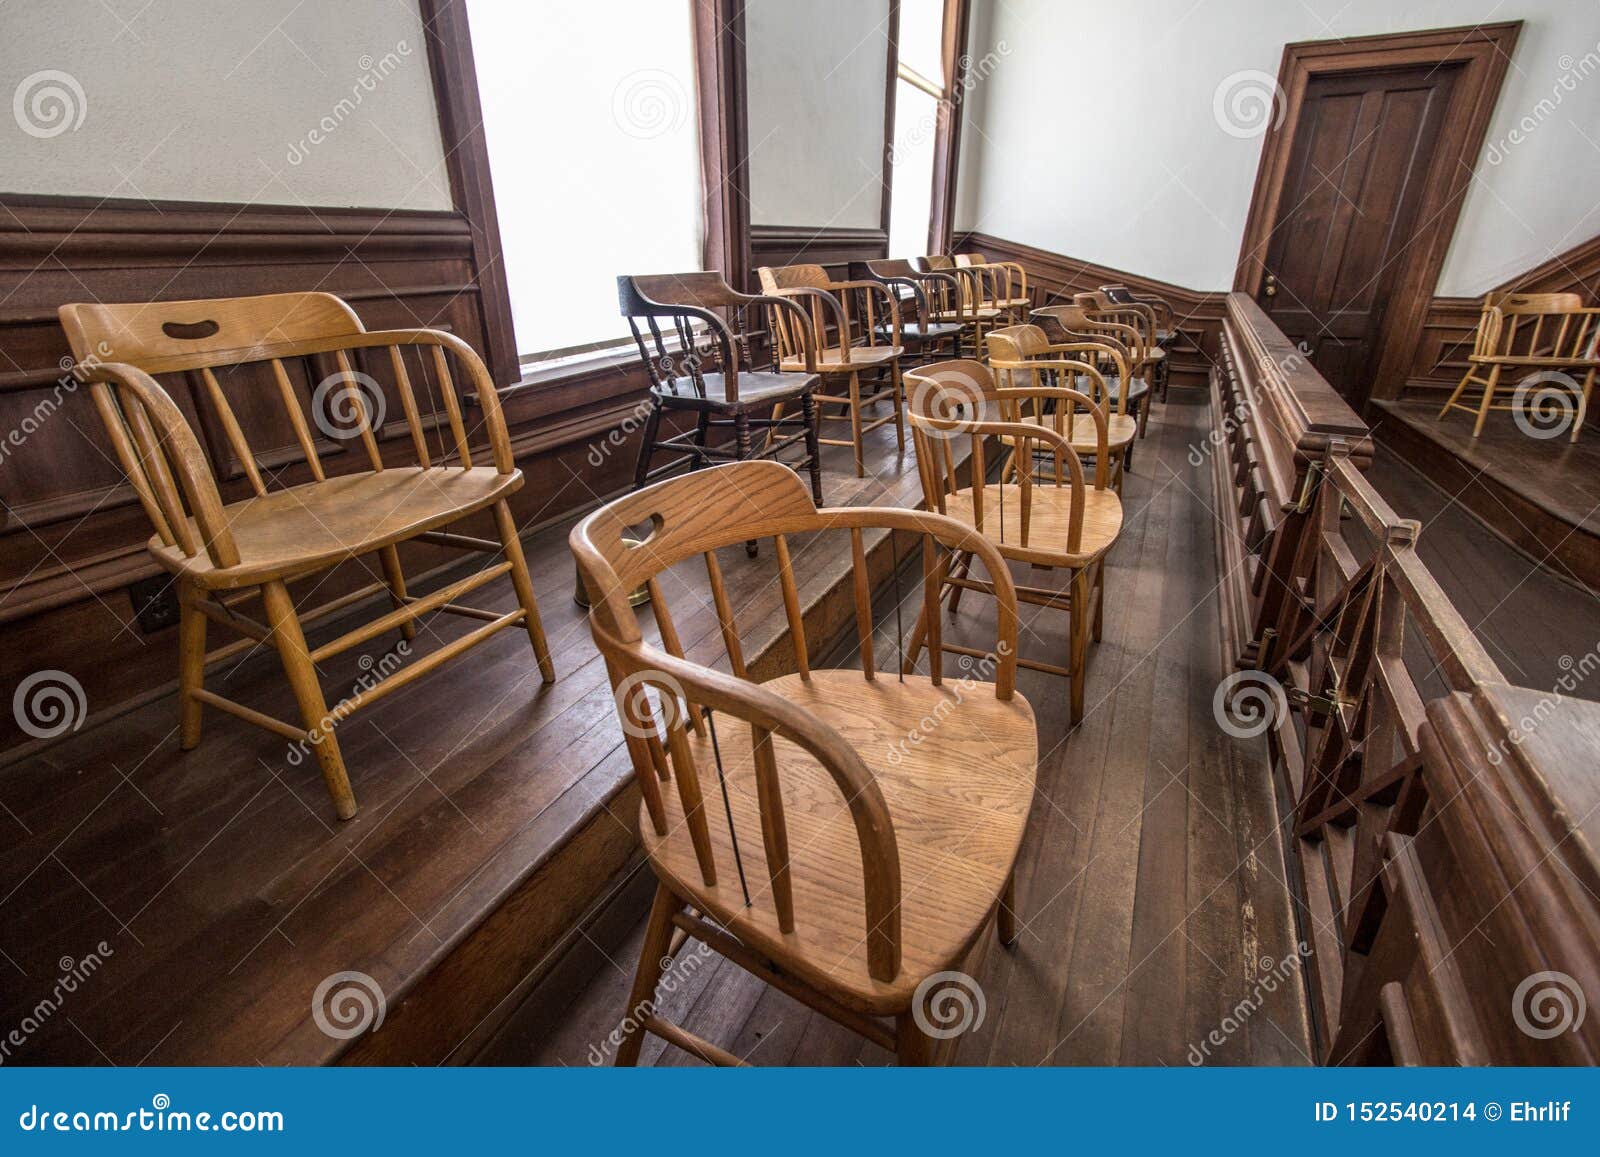 jury box in courtroom interior